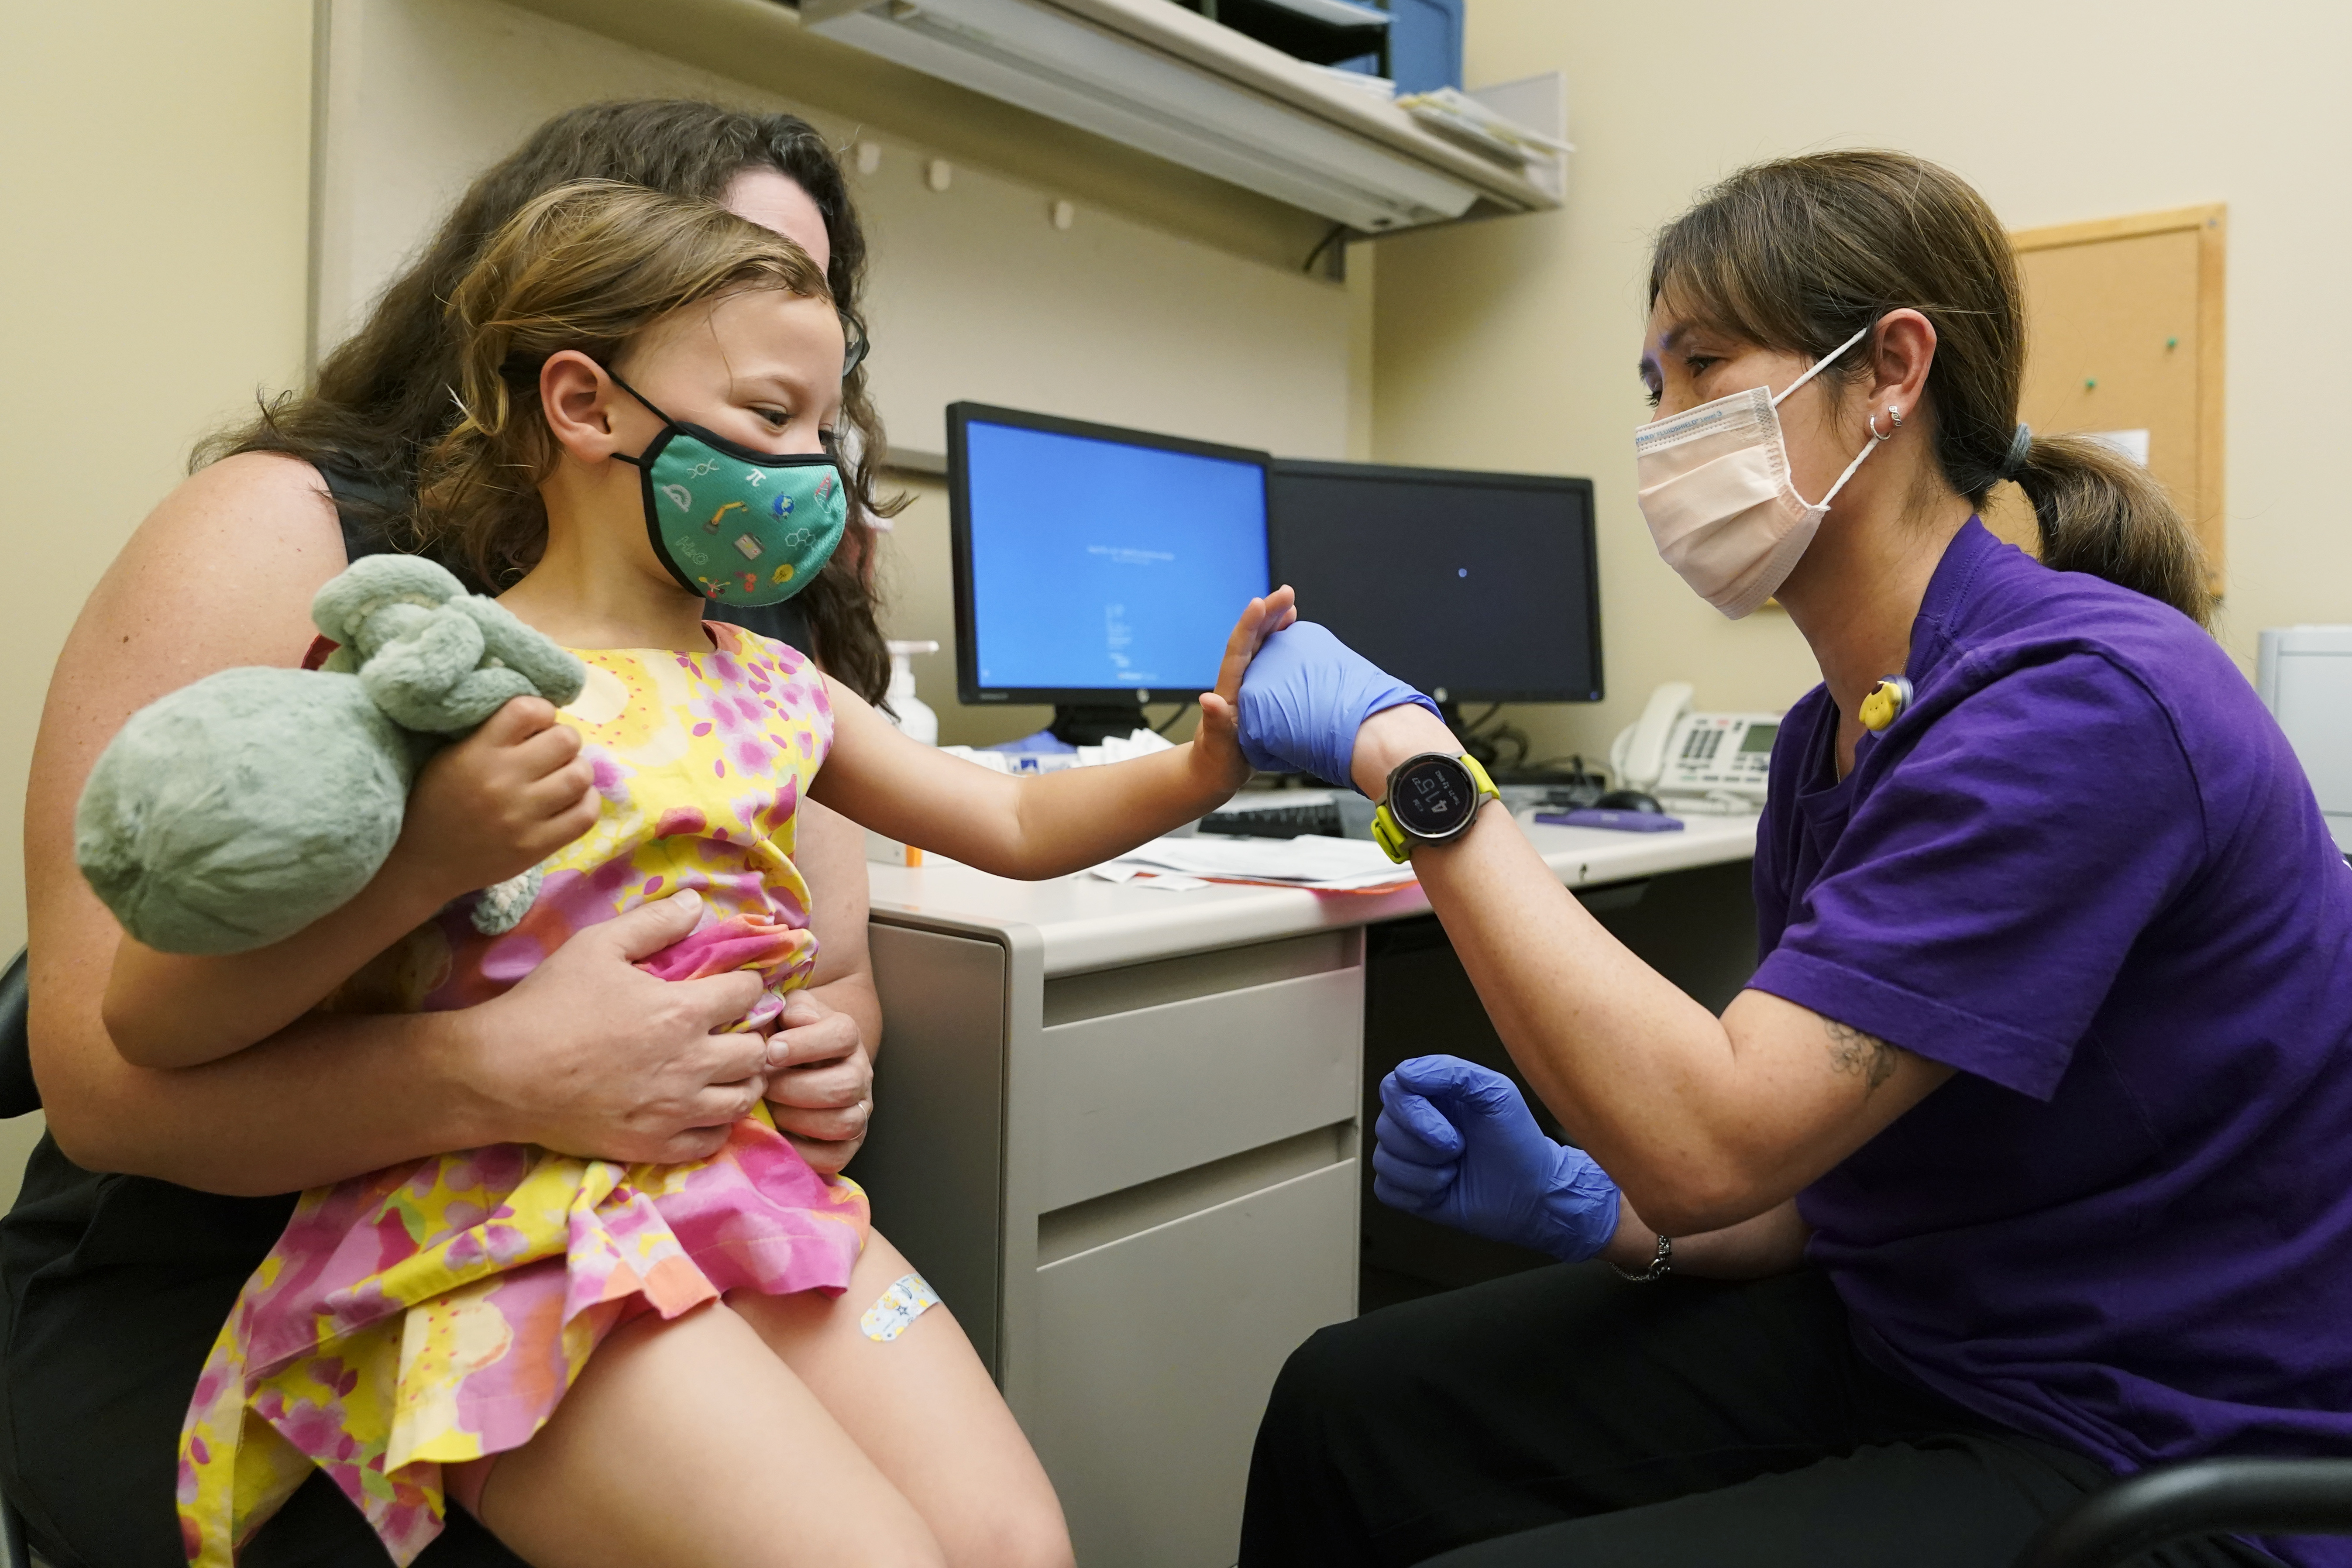 Preparing your child — and yourself — for a doctor's appointment